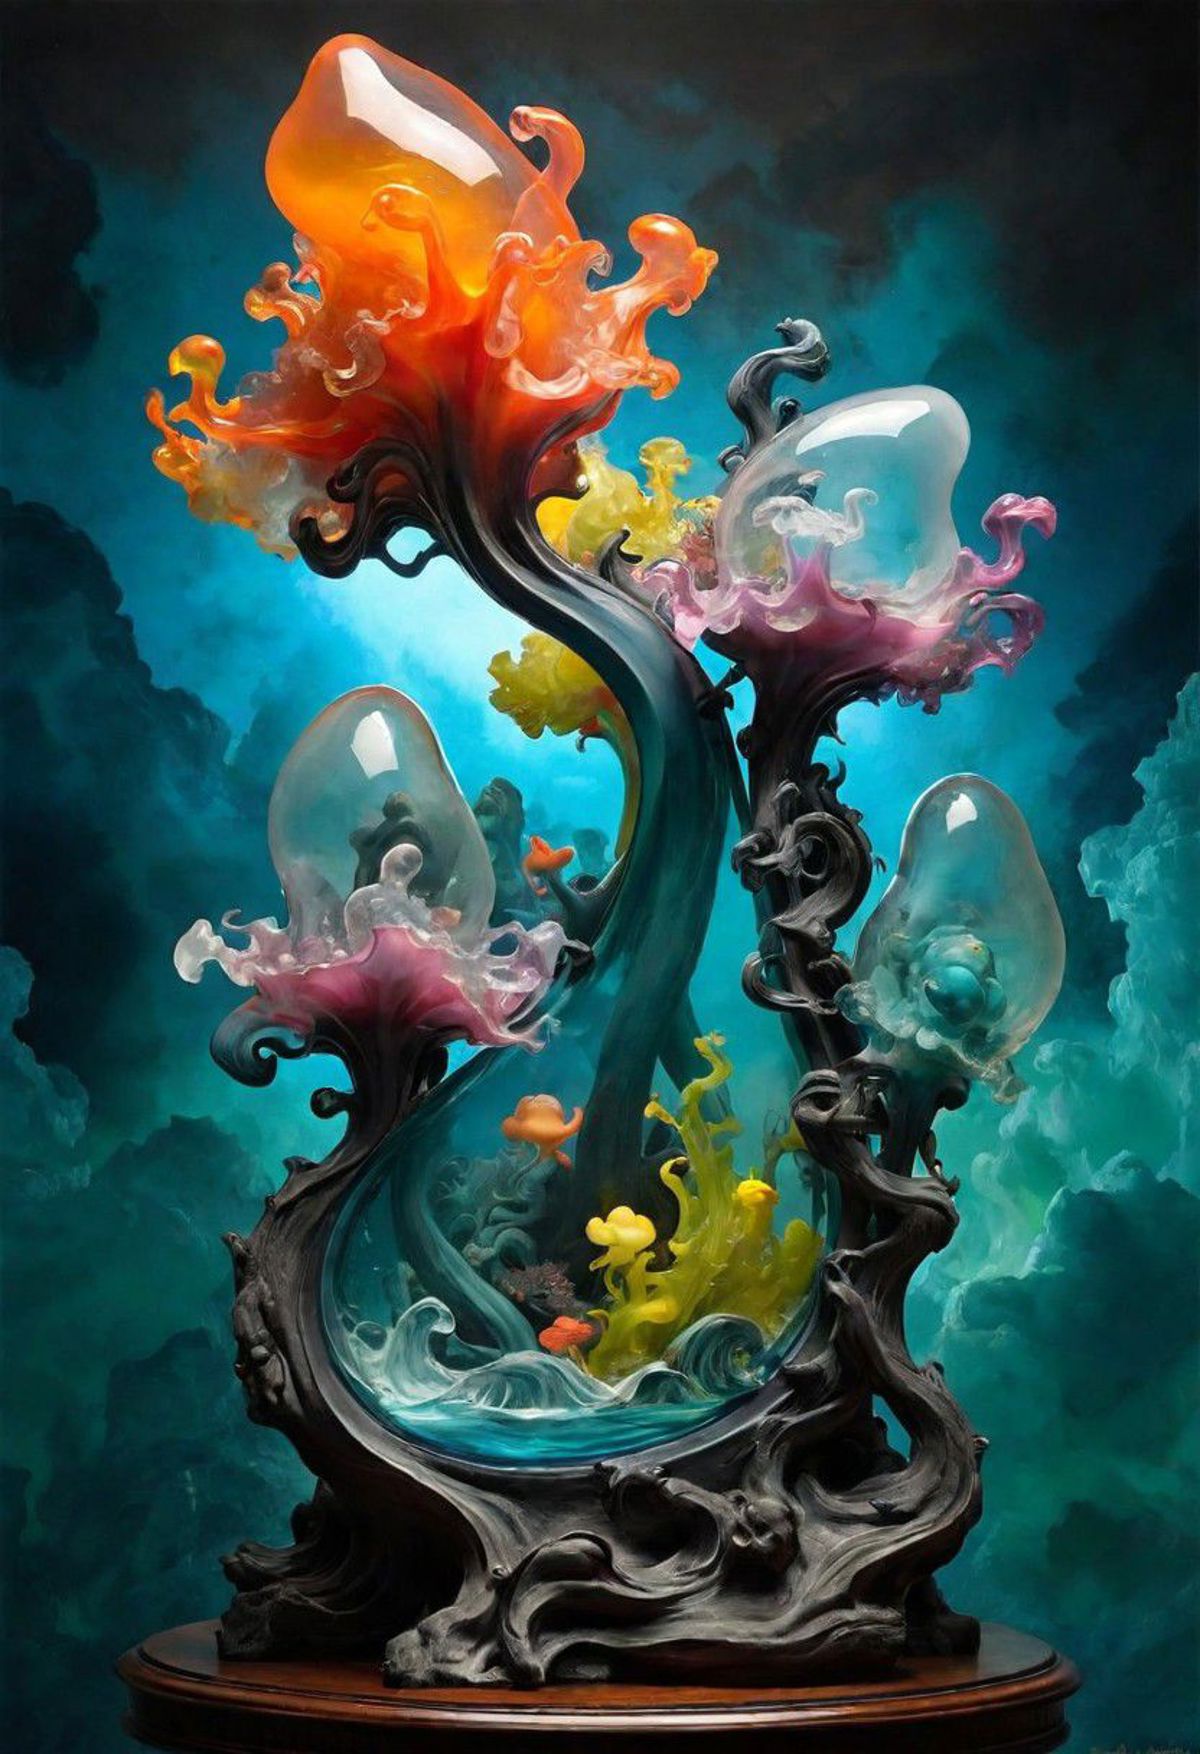 Artistic Glass Statue of a Tree with Flower-like Ornaments on its Branches